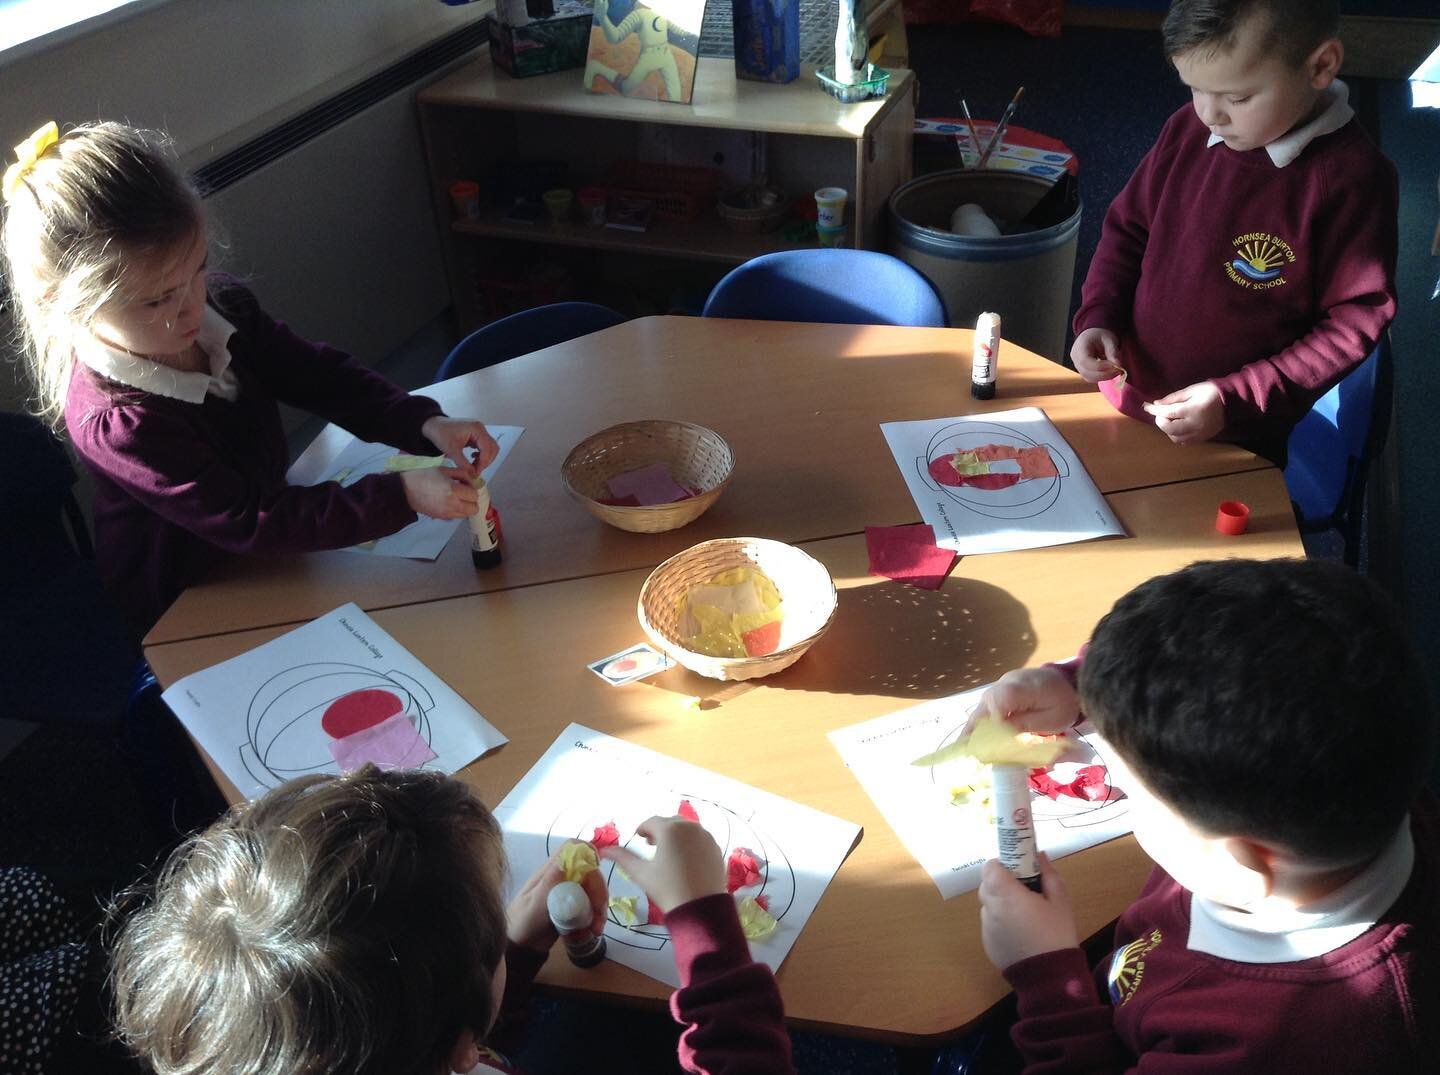 HB EYFS have enjoyed learning all about Chinese culture and celebrating the Year of the Tiger by creating their own lantern and by having a selection of Chinese food to try at snack time.